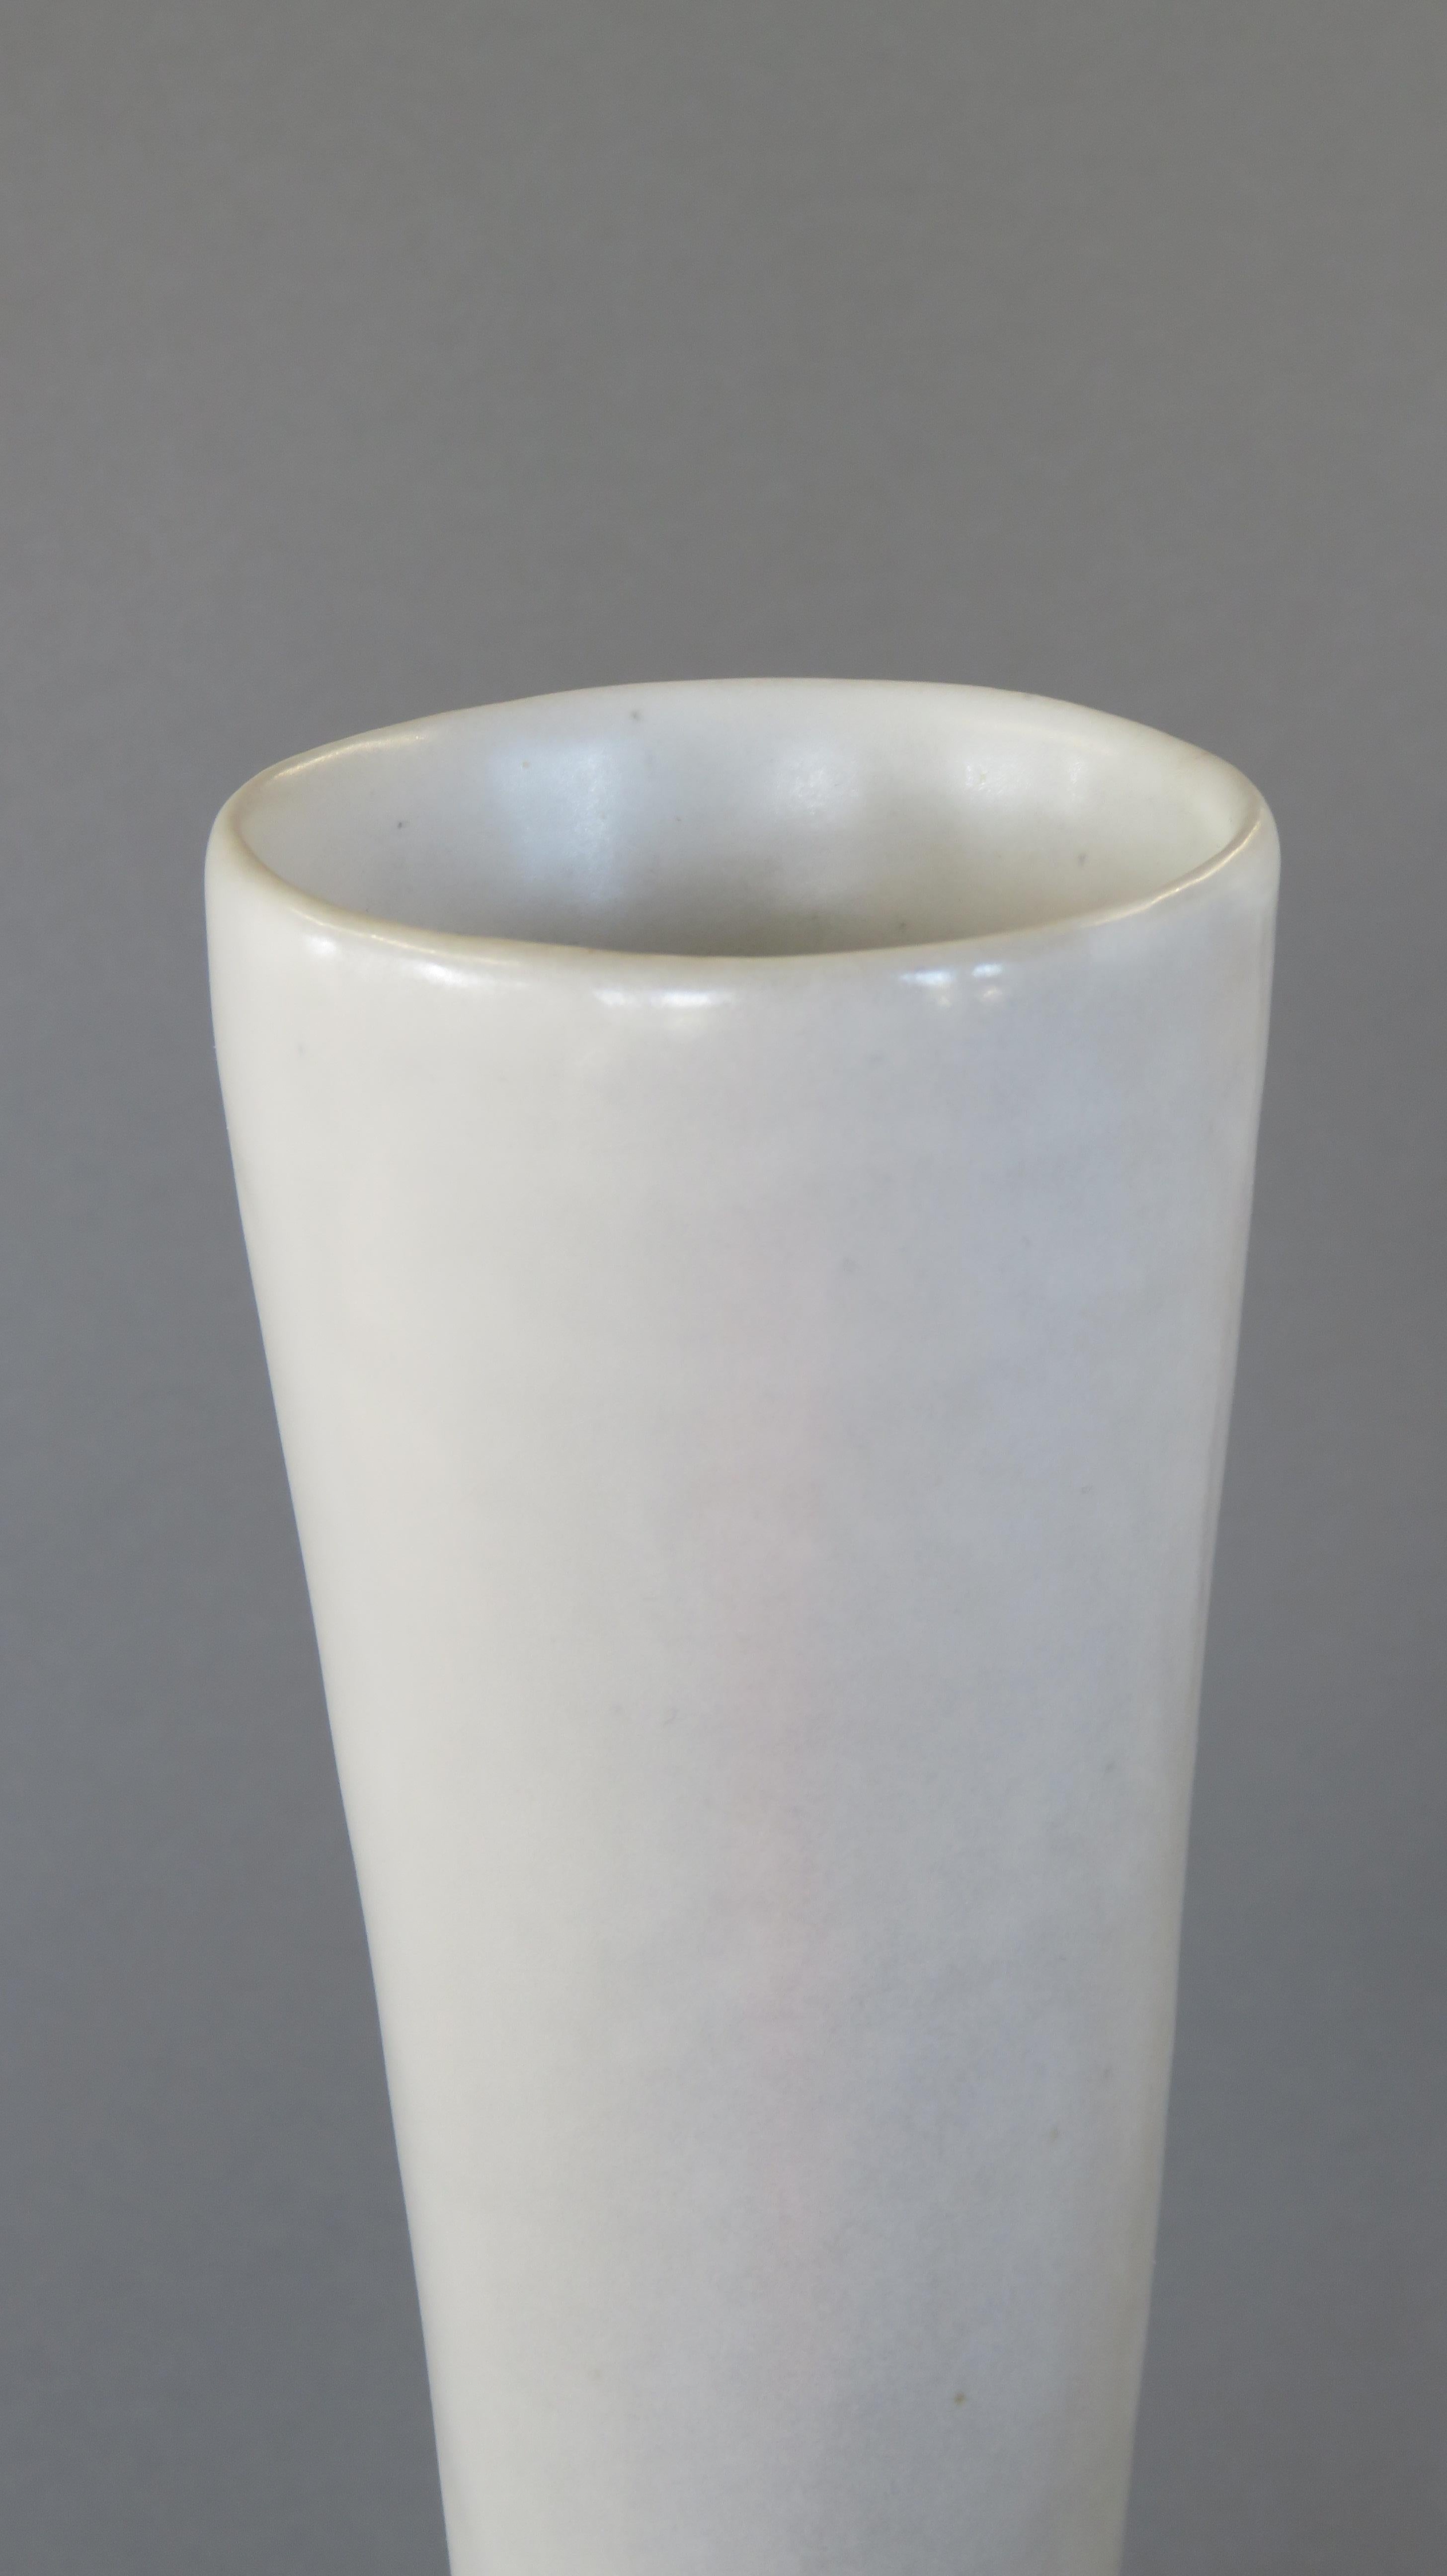 North American Tall Hand Built Ceramic Vase, White Glaze on Stoneware, 22.88 Inches Tall For Sale